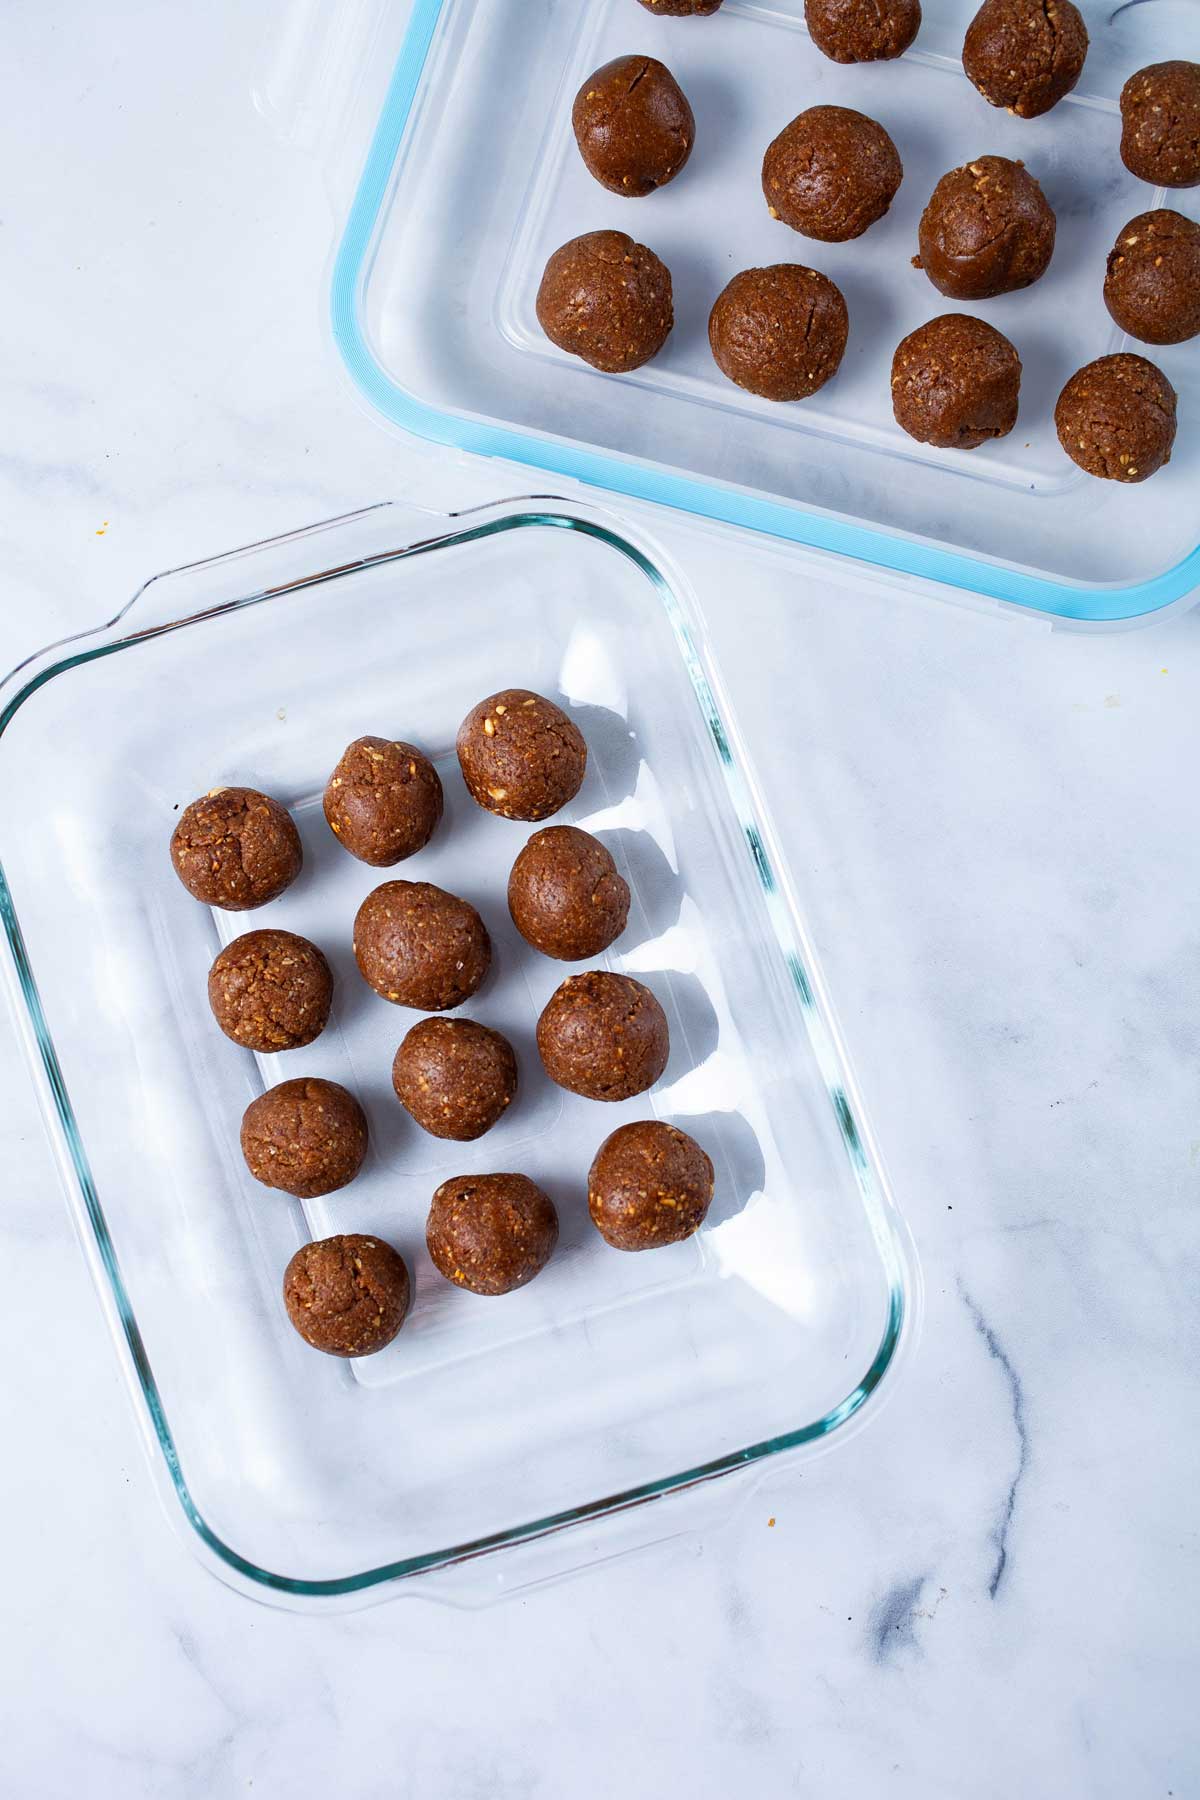 Gluten-free energy balls lined up next to each other in a glass container.